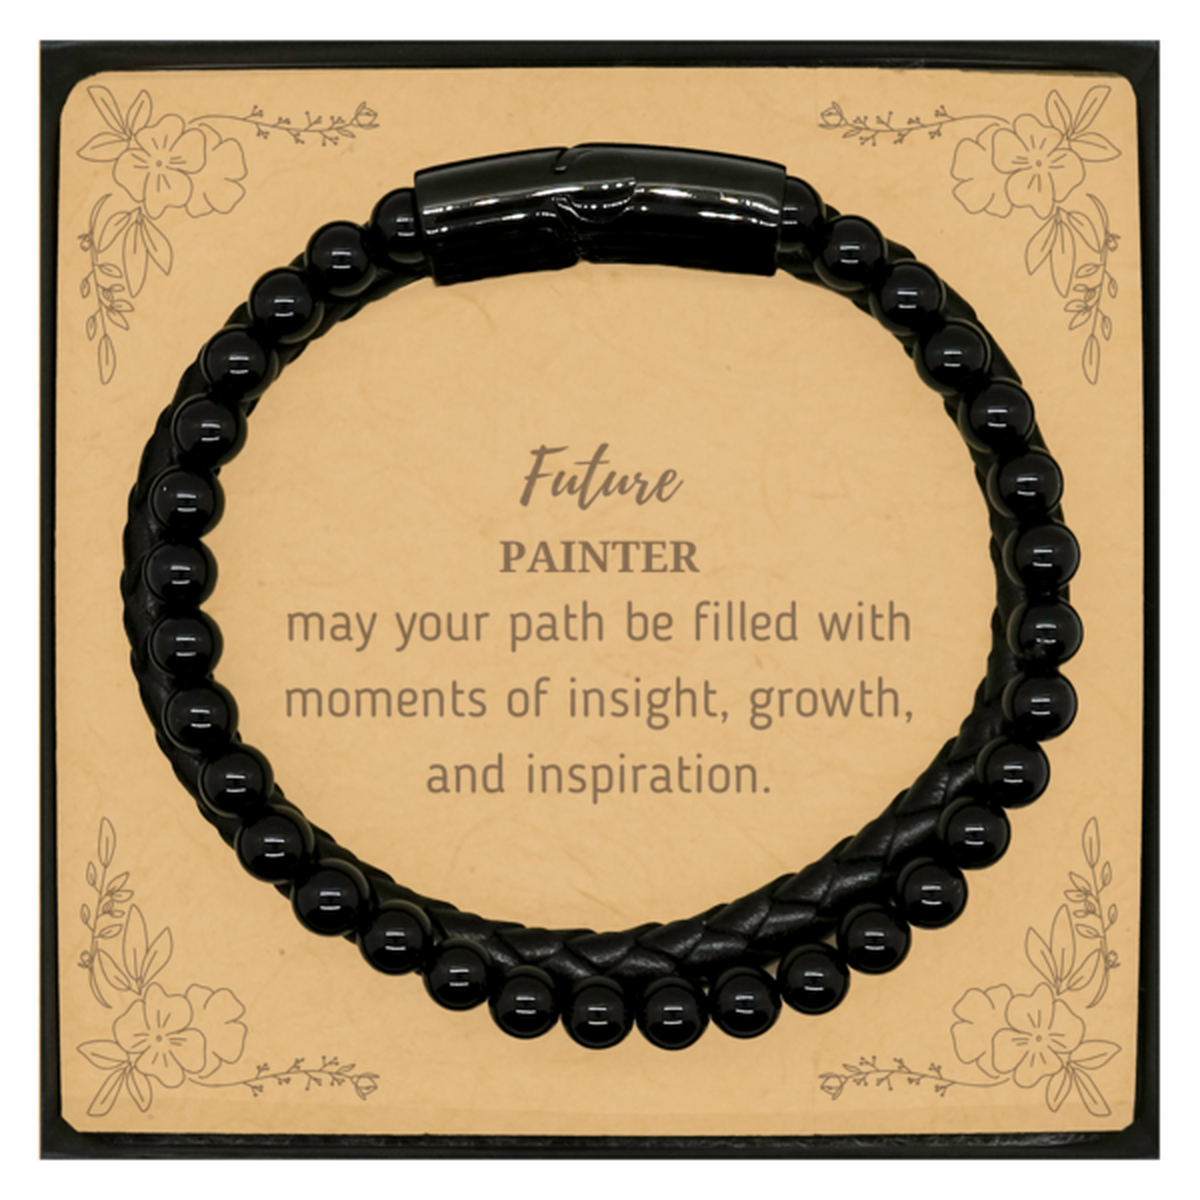 Future Painter Gifts, May your path be filled with moments of insight, Graduation Gifts for New Painter, Christmas Unique Stone Leather Bracelets For Men, Women, Friends